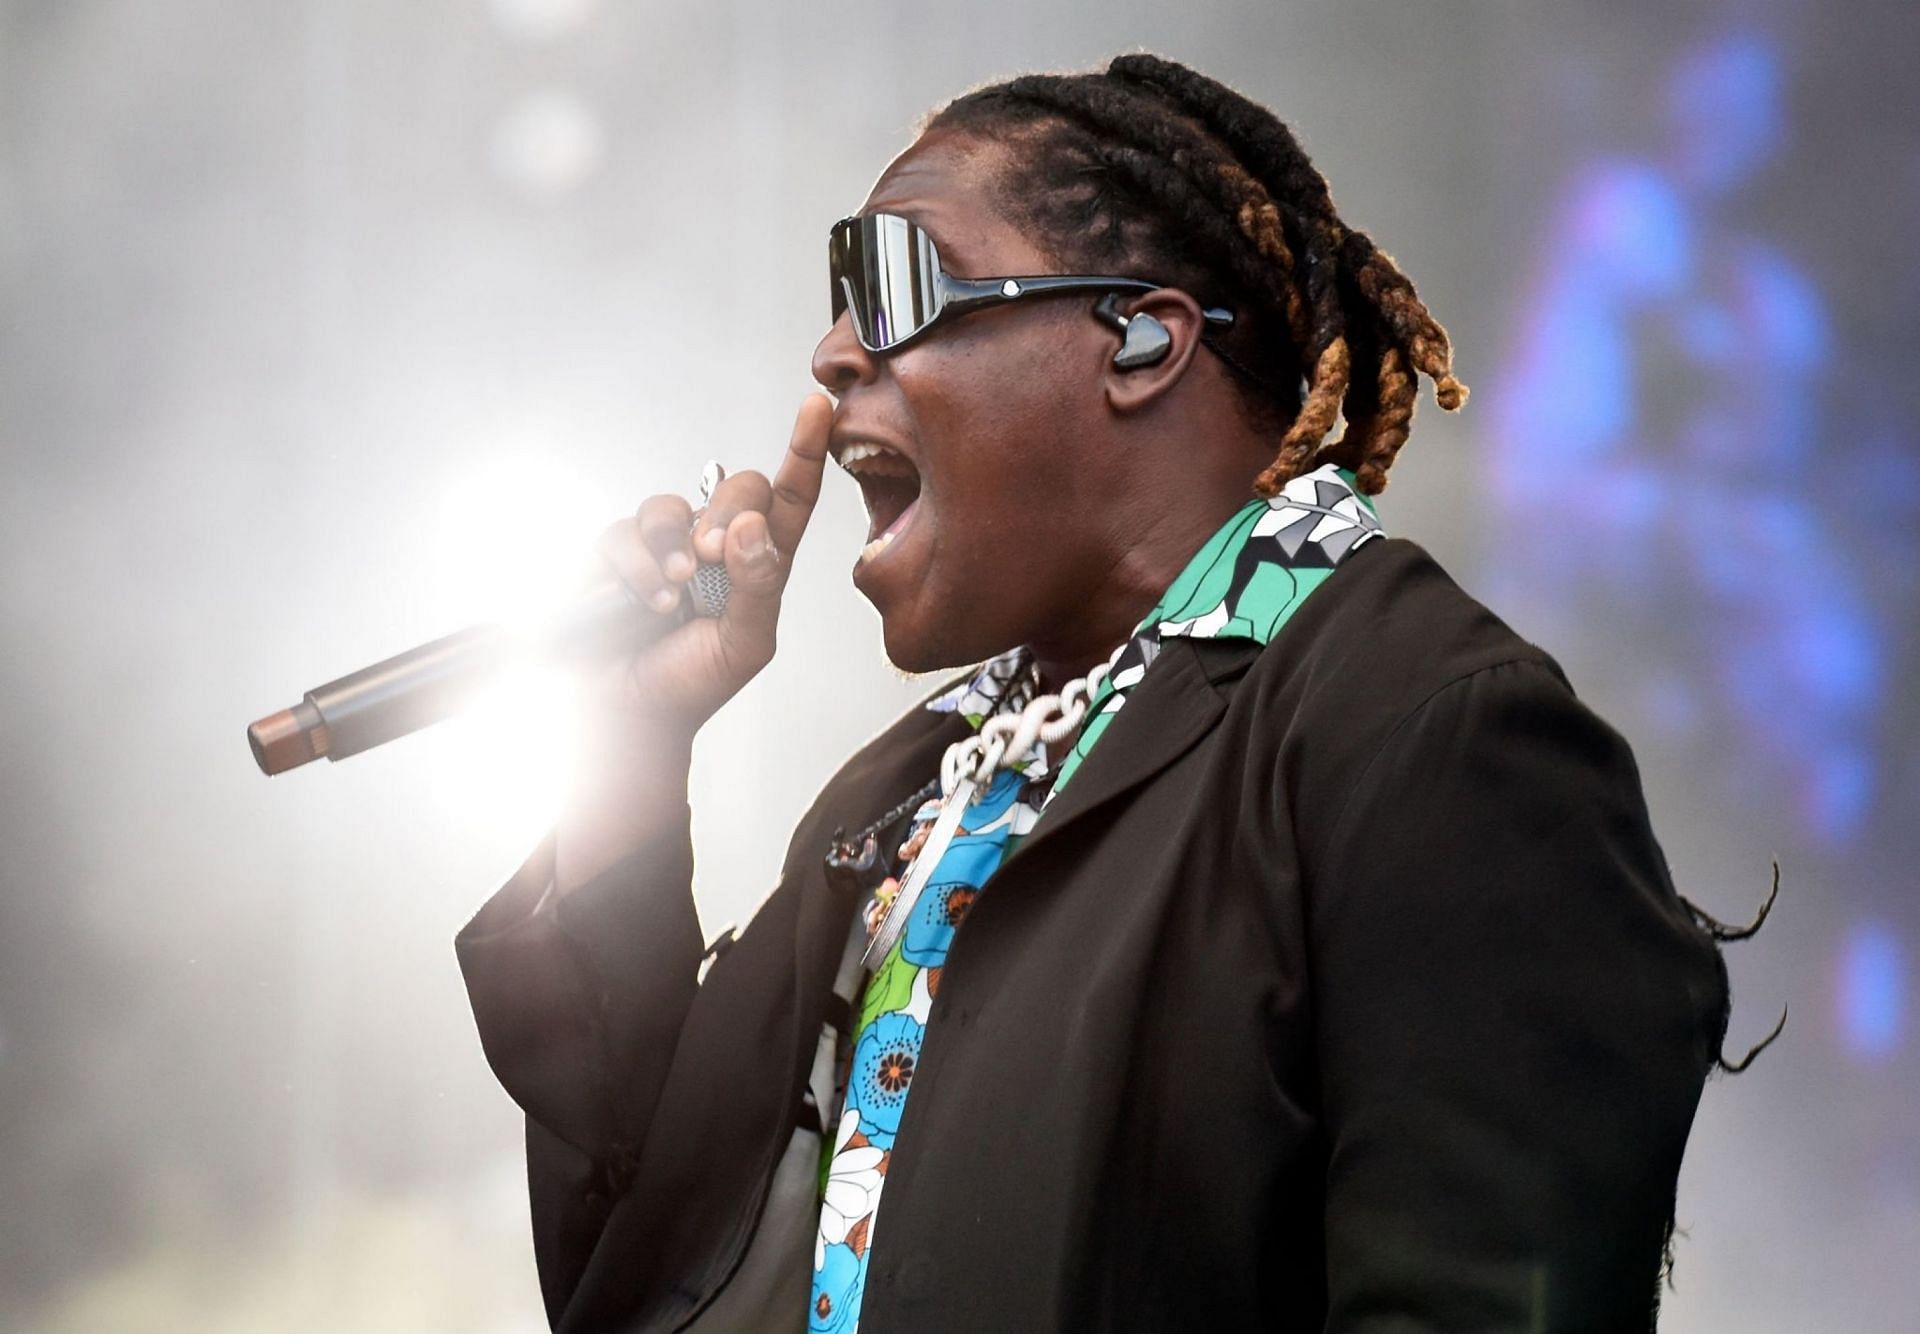 Don Toliver at Lollapalooza 2022 Day 2 (Image via Getty Images)